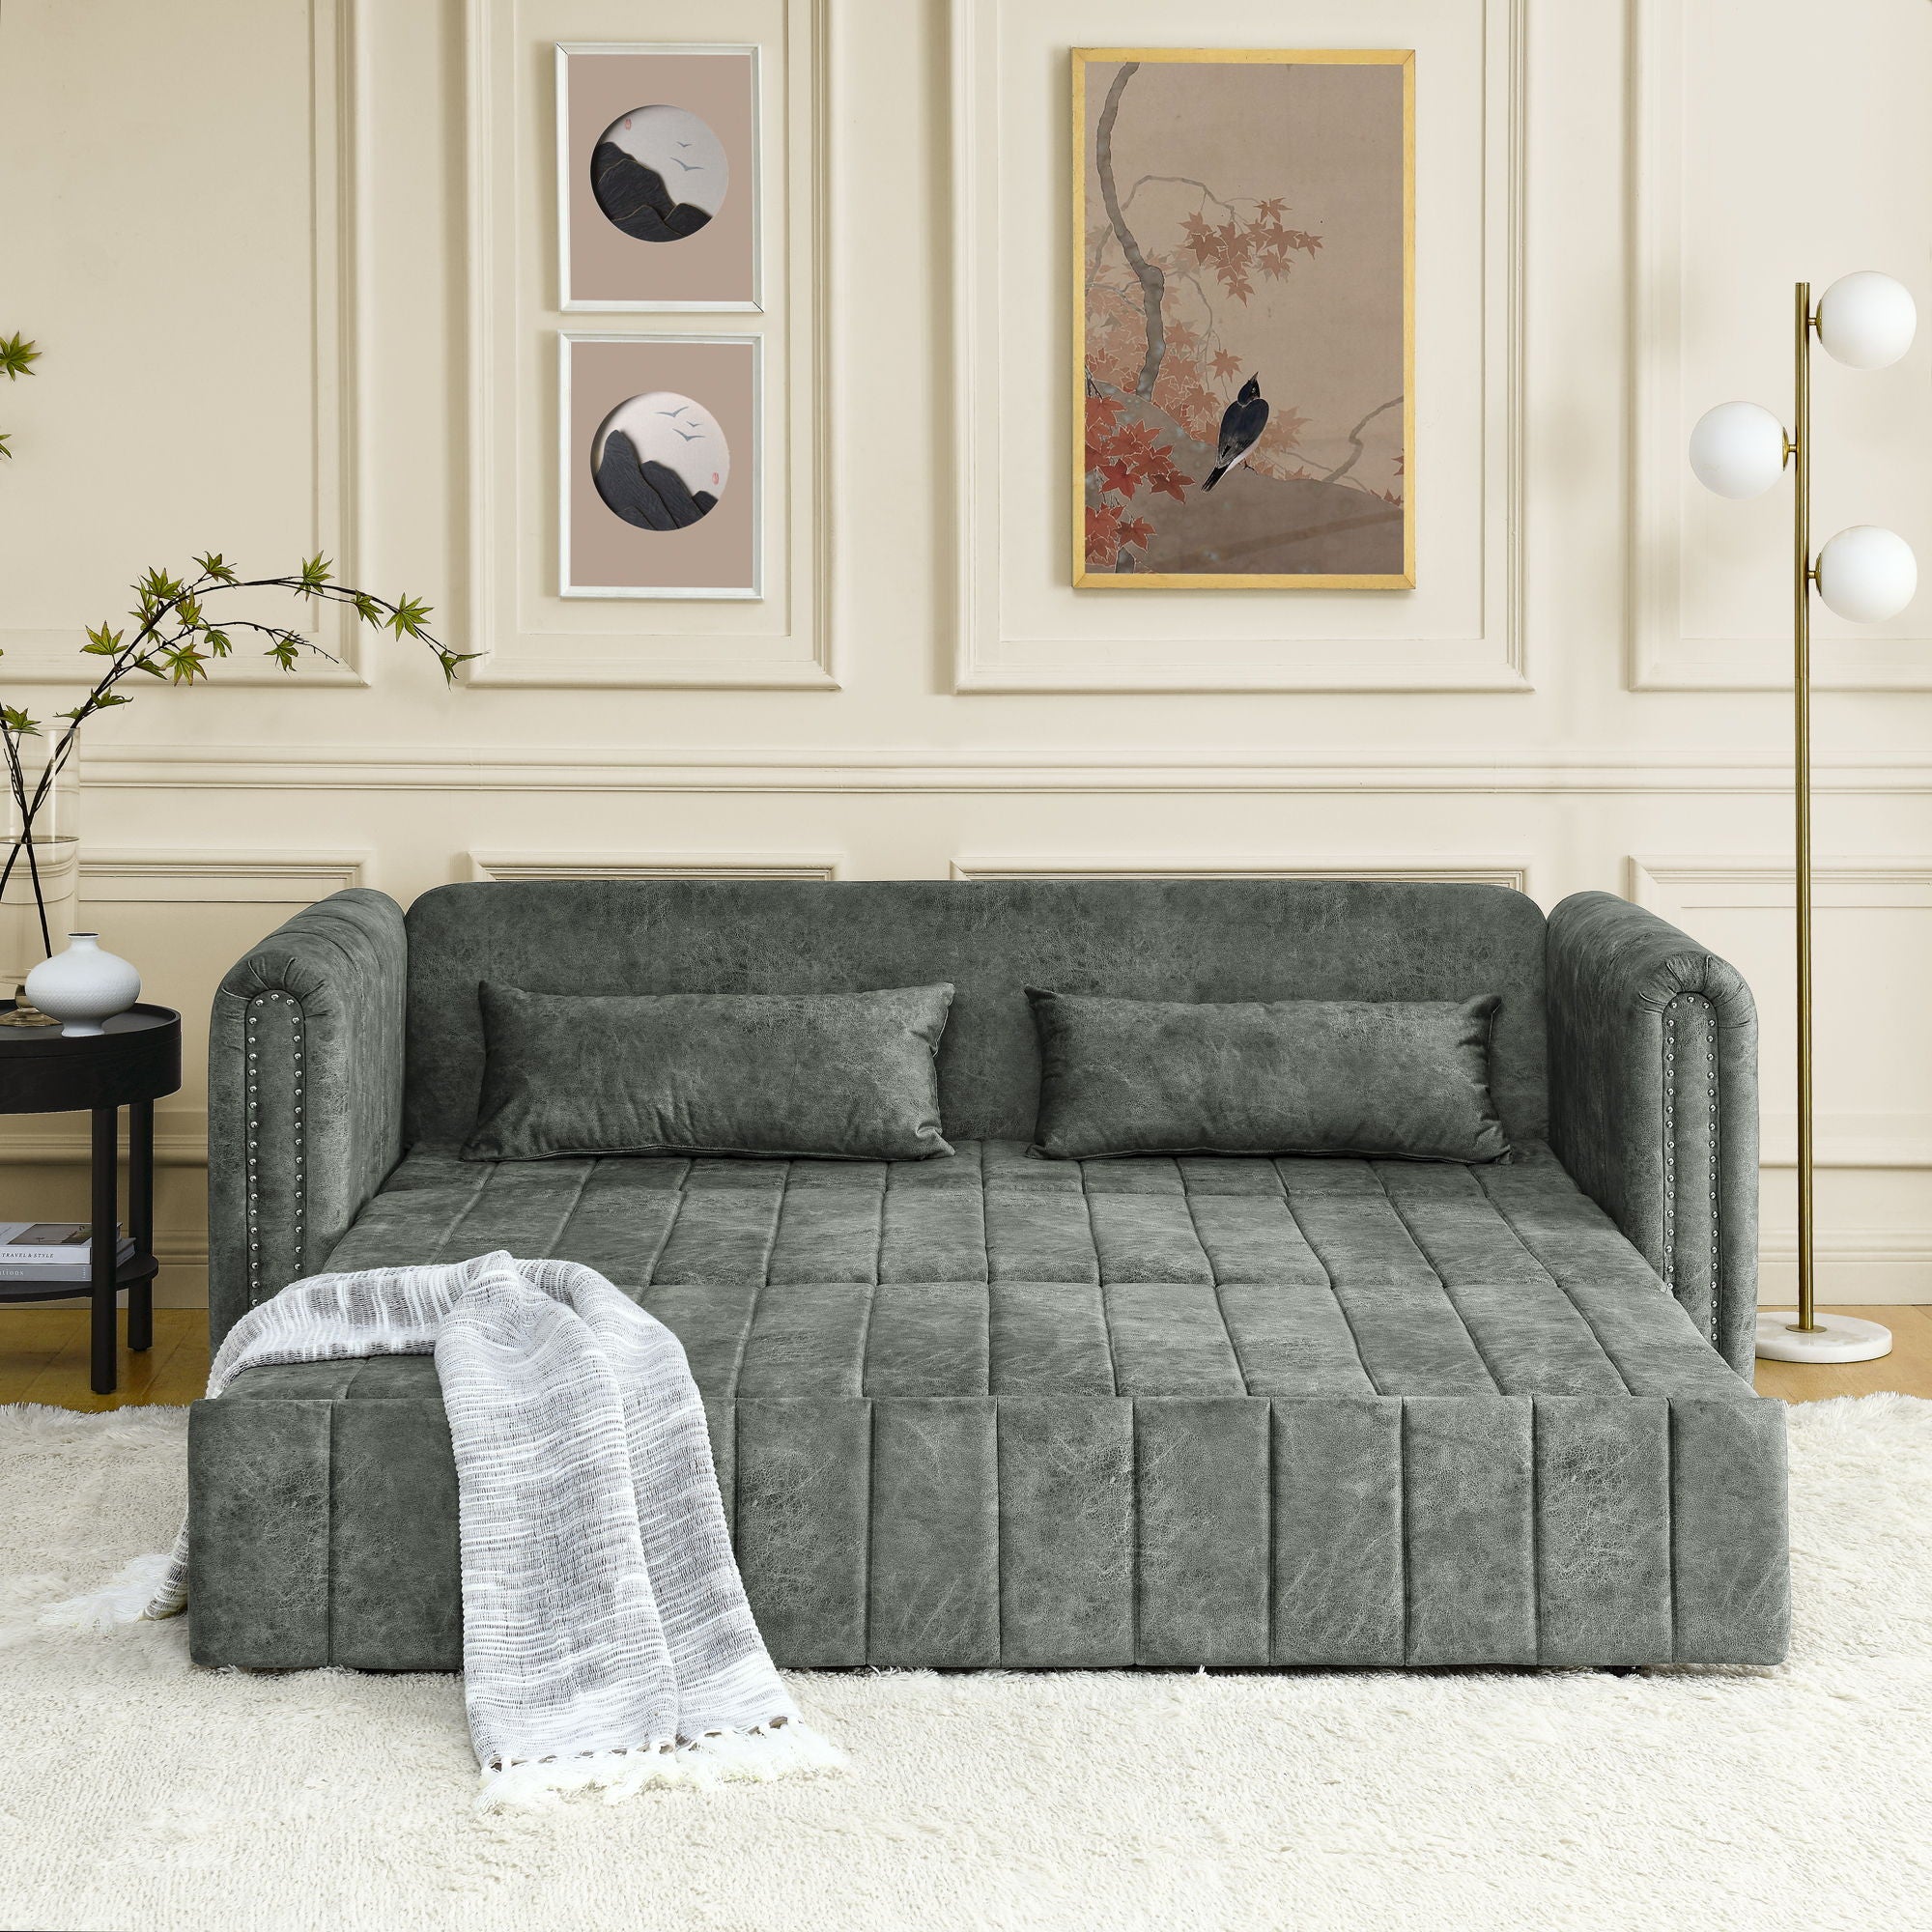 3 In 1 Pull-Out Bed Sleeper, Modern Upholstered 3 Seats Lounge Sofa & Couches With Rolled Arms Decorated With Copper Nails Convertible Futon 3 Seats Sofabed With Two Drawers And Two Pillows